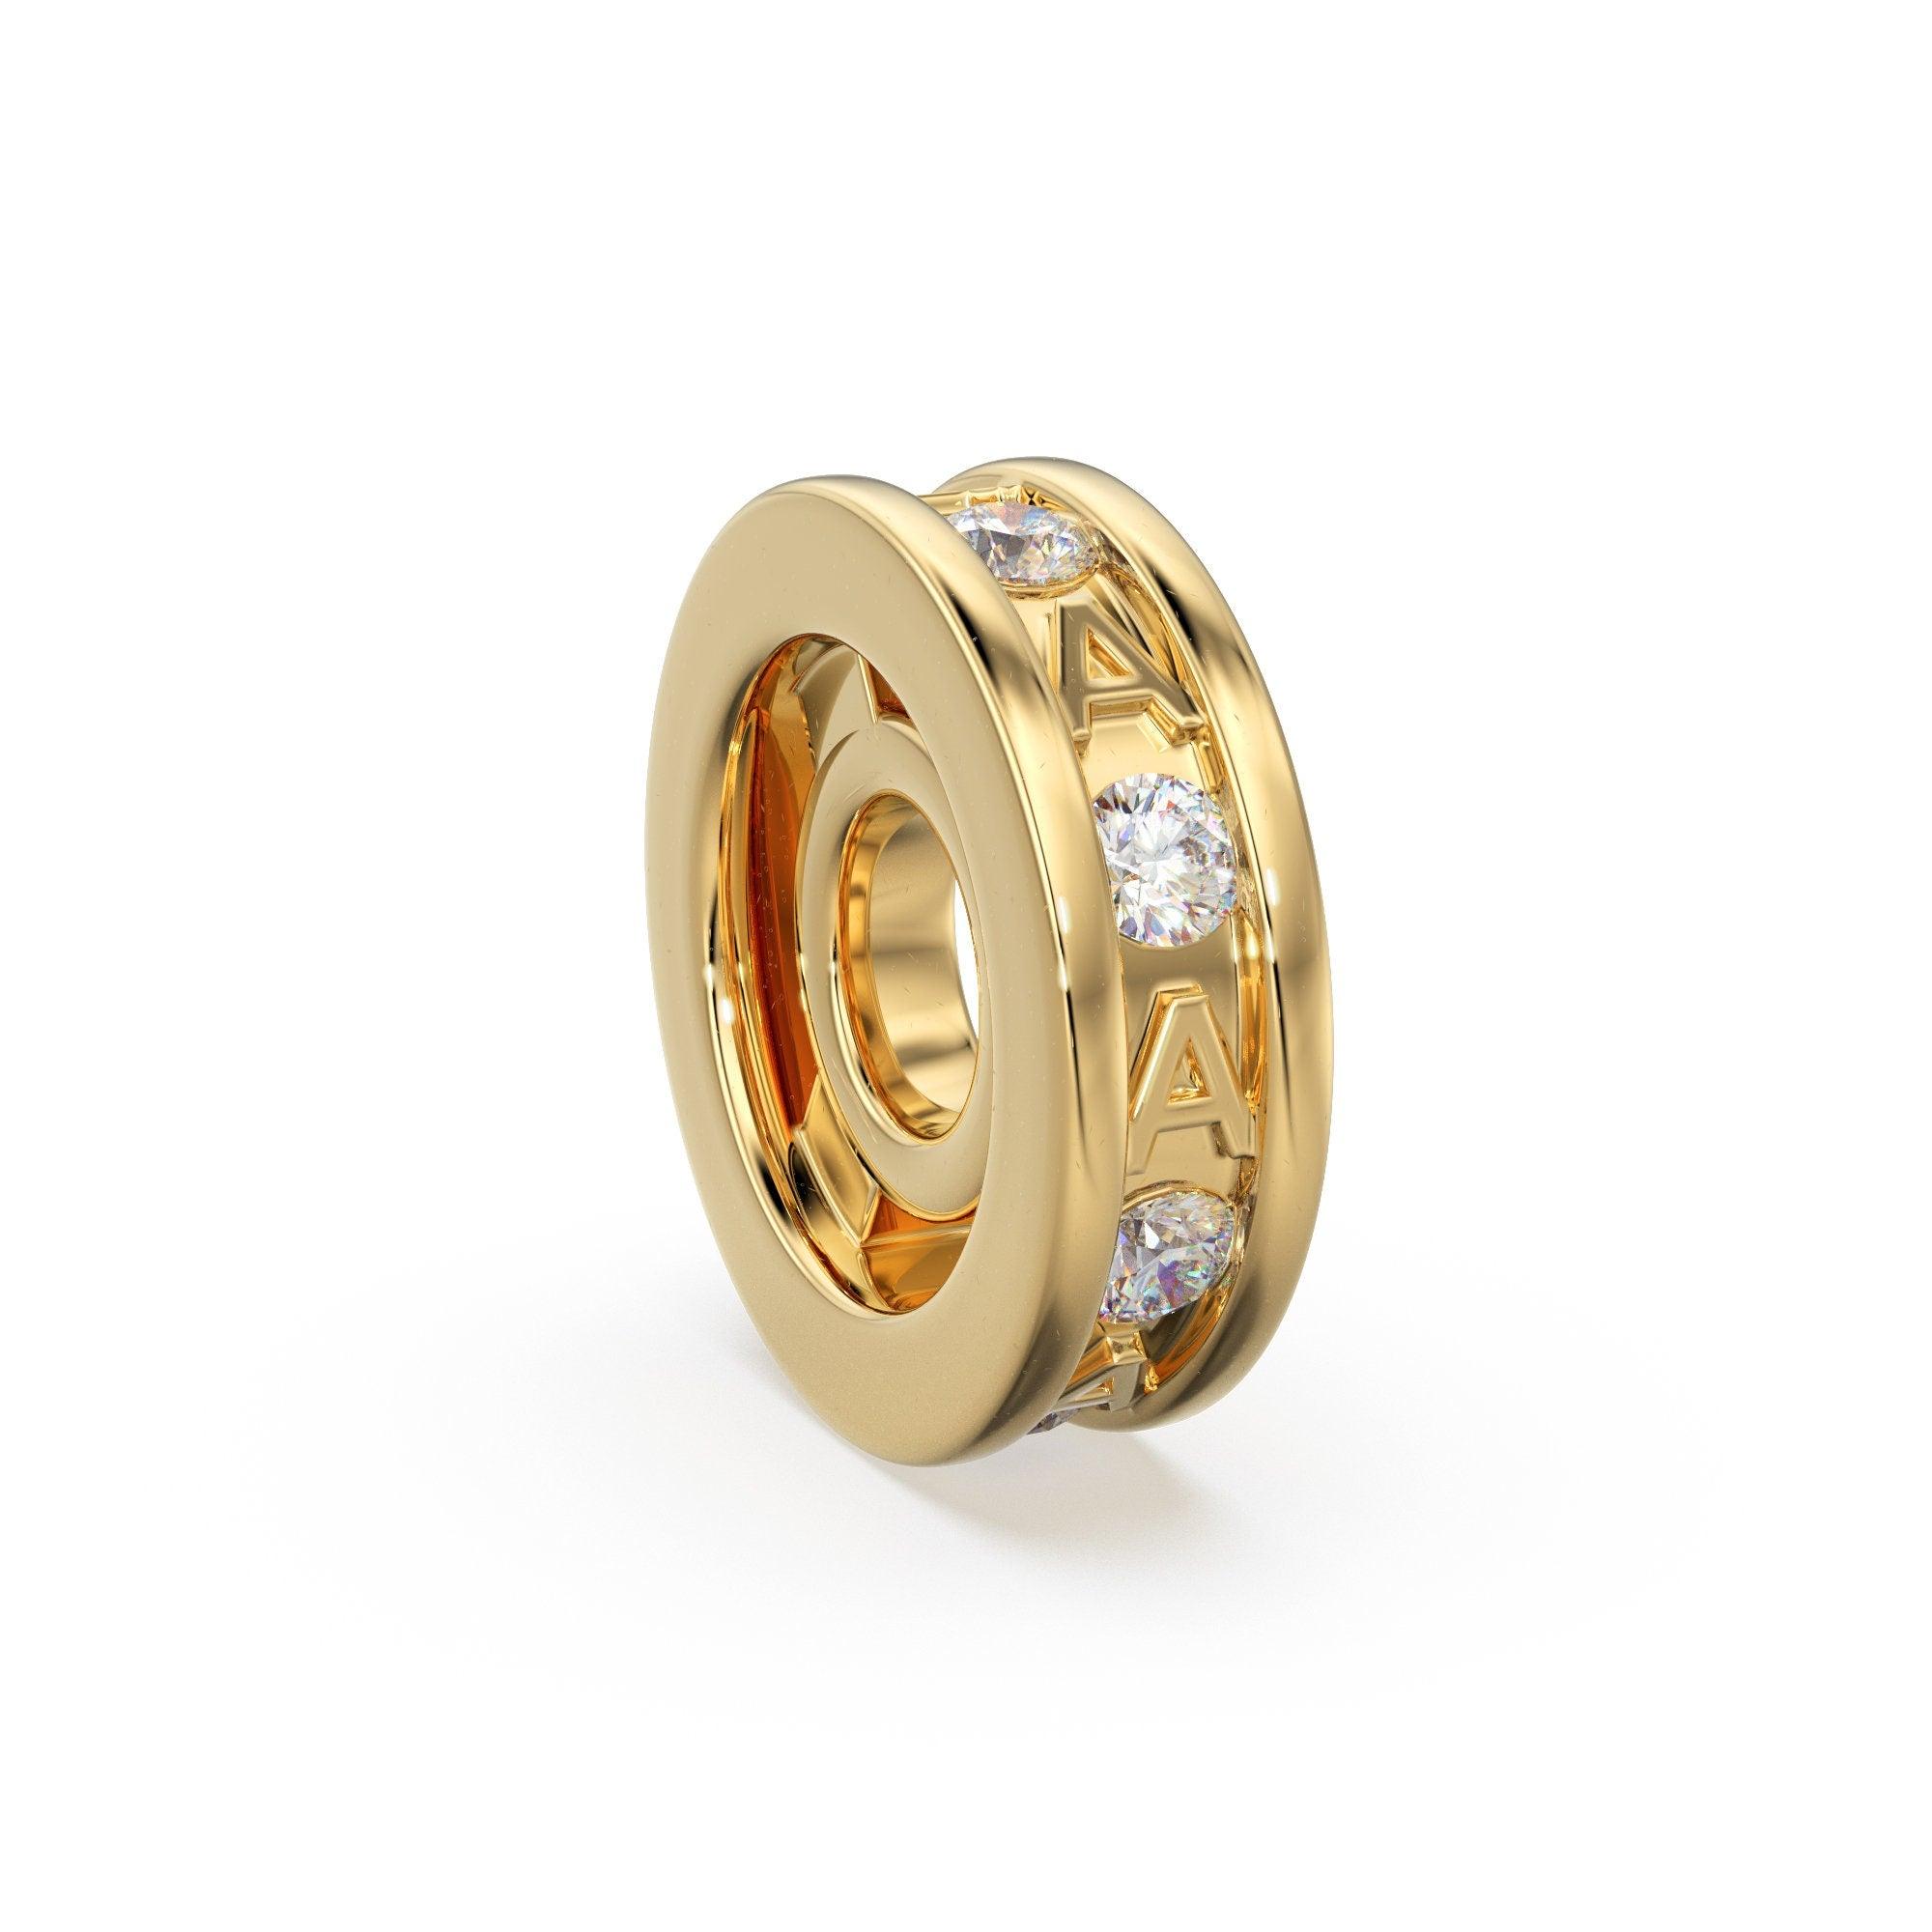 Sophisticated Layered Diamond and Gold Alphabet Finger Ring